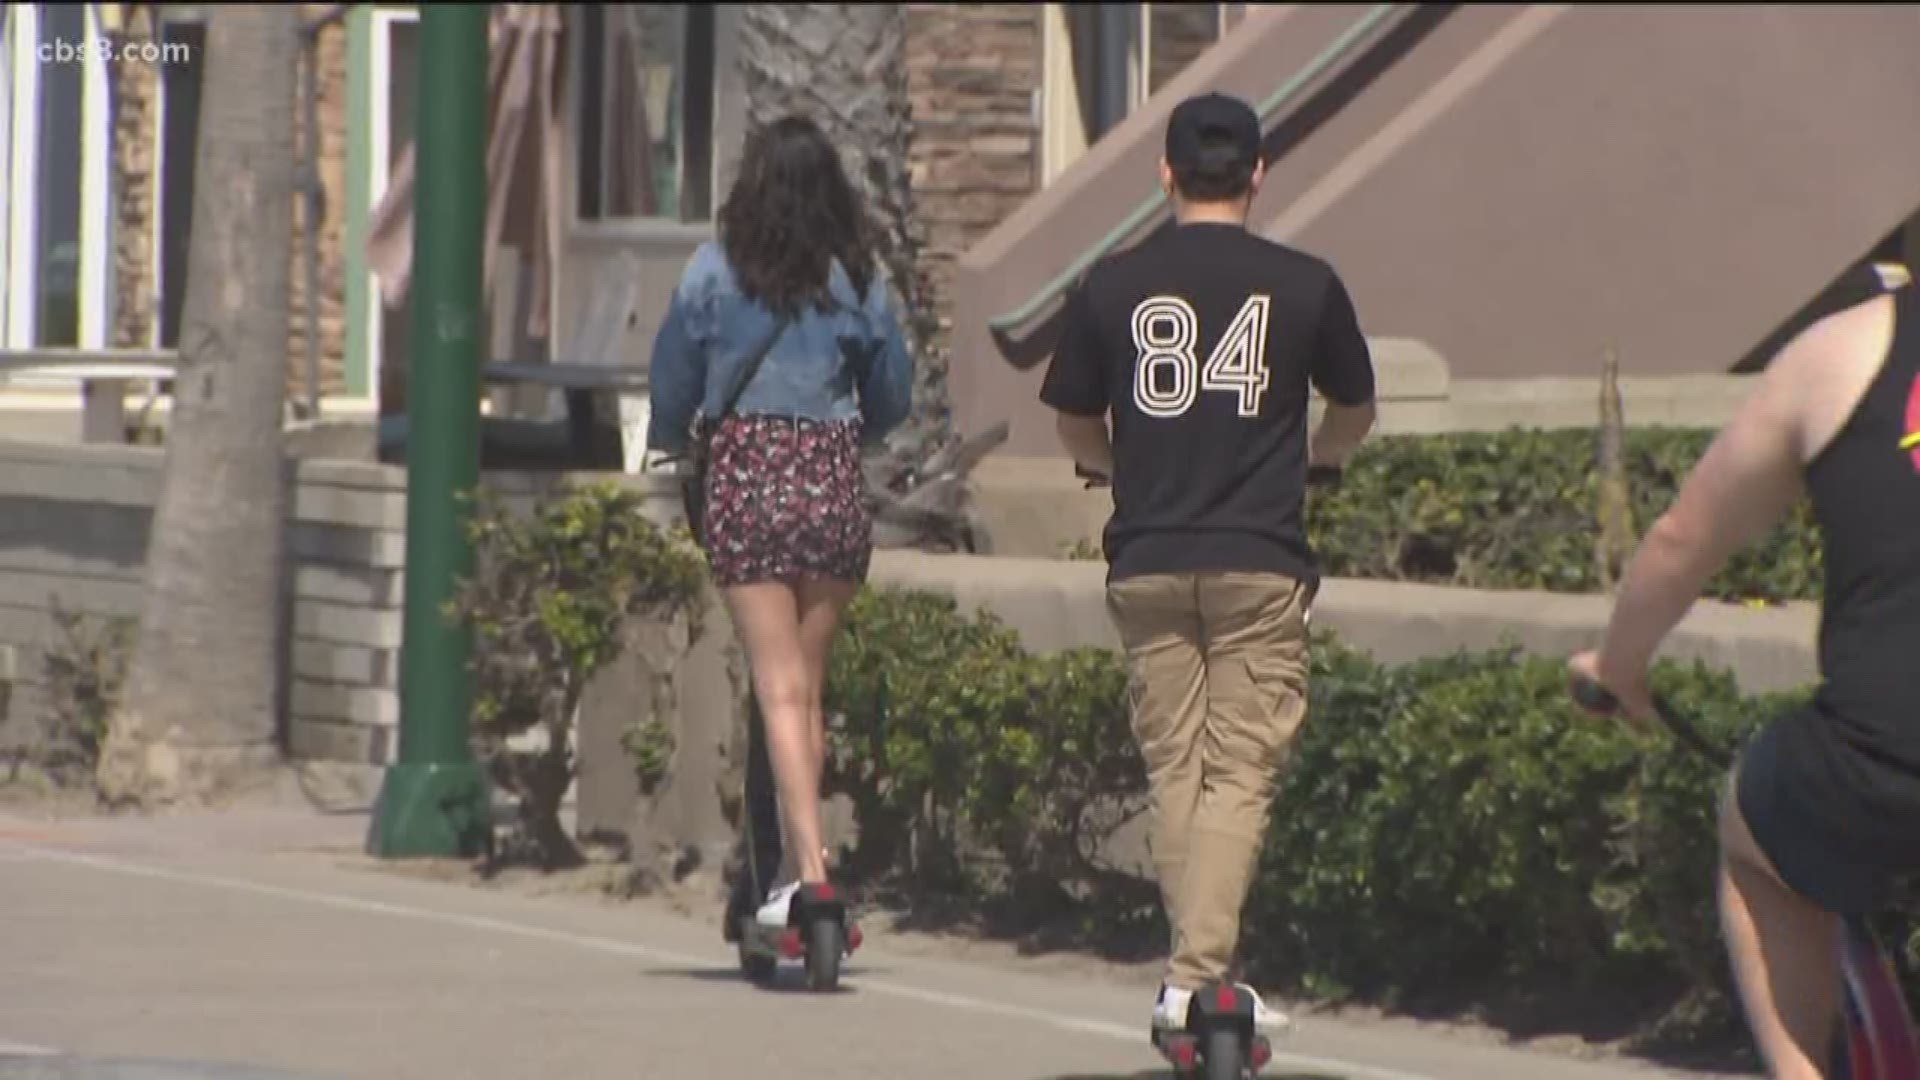 The San Diego Police Department will be providing warnings to motorized scooter riders for the first 30 days and after that warning period, citations will be issued.